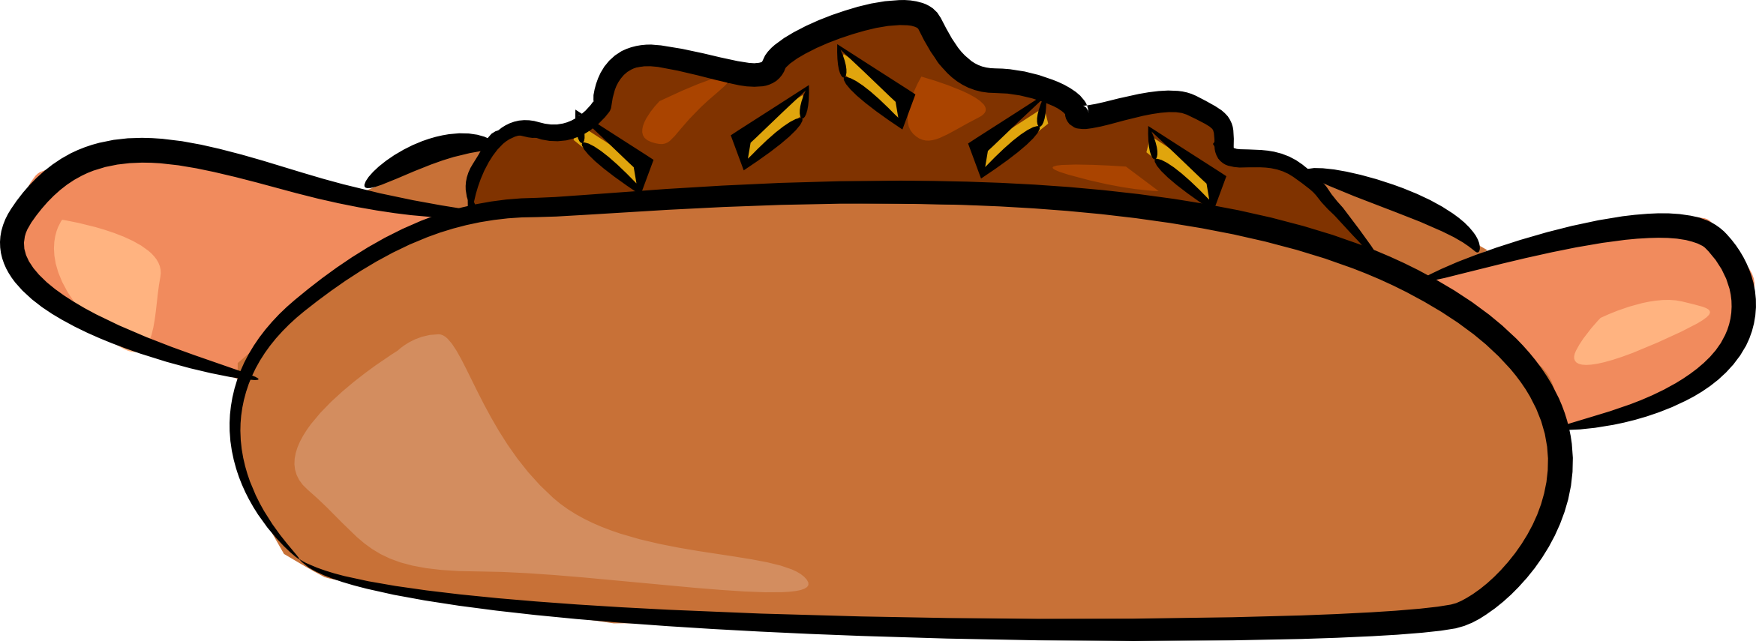 Chili cute dog clip art free free clipart images image #29365